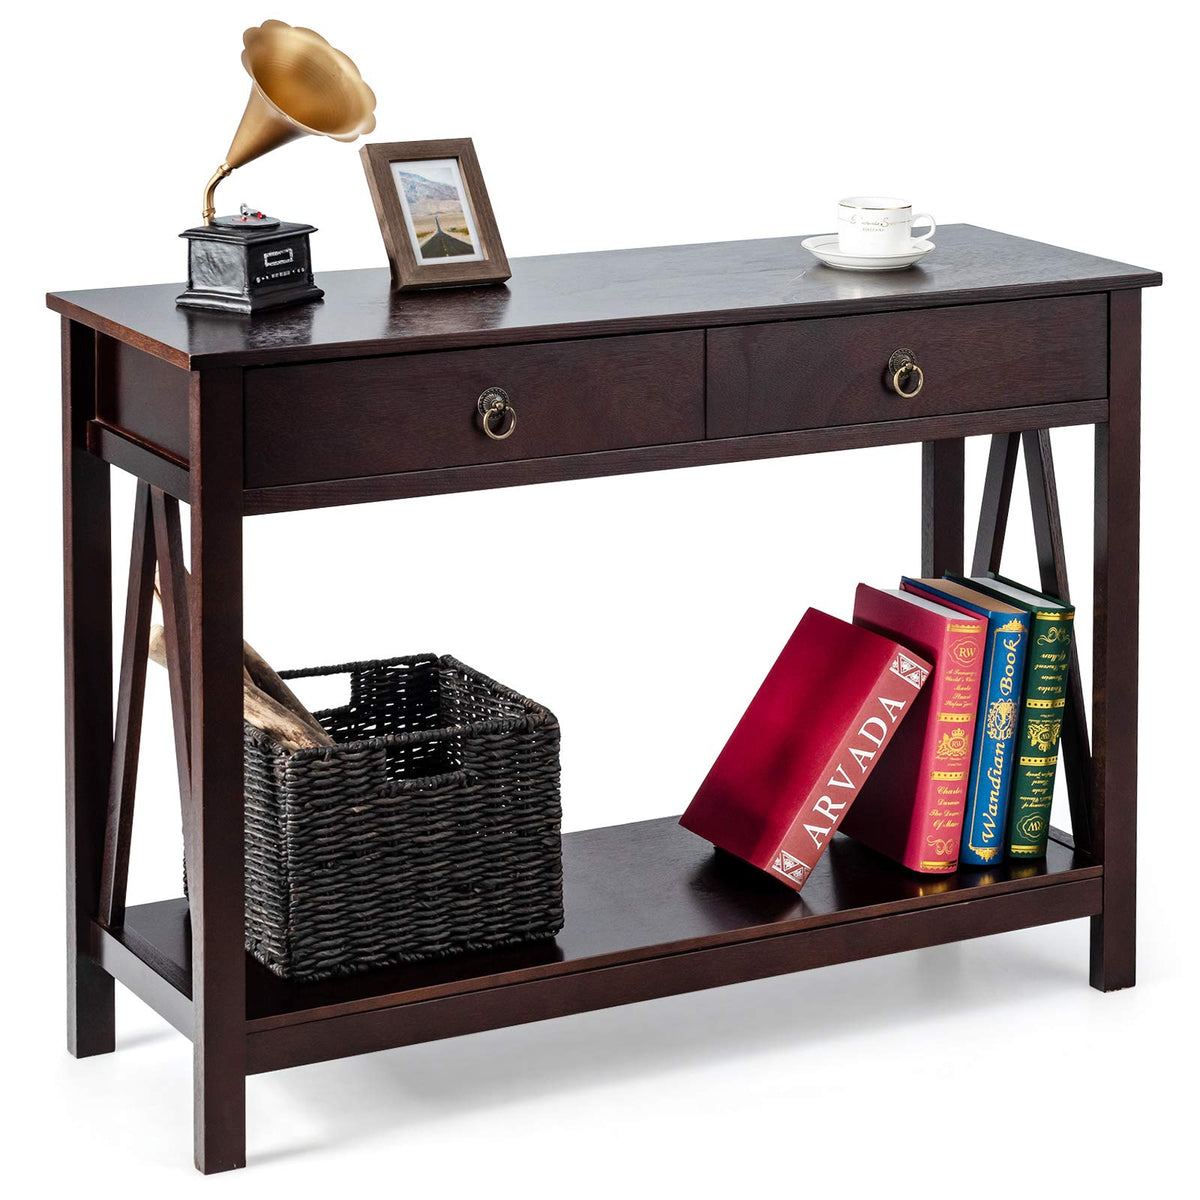 Giantex Console Table with Drawers 3-Tier Couch Table with Storage Shelves